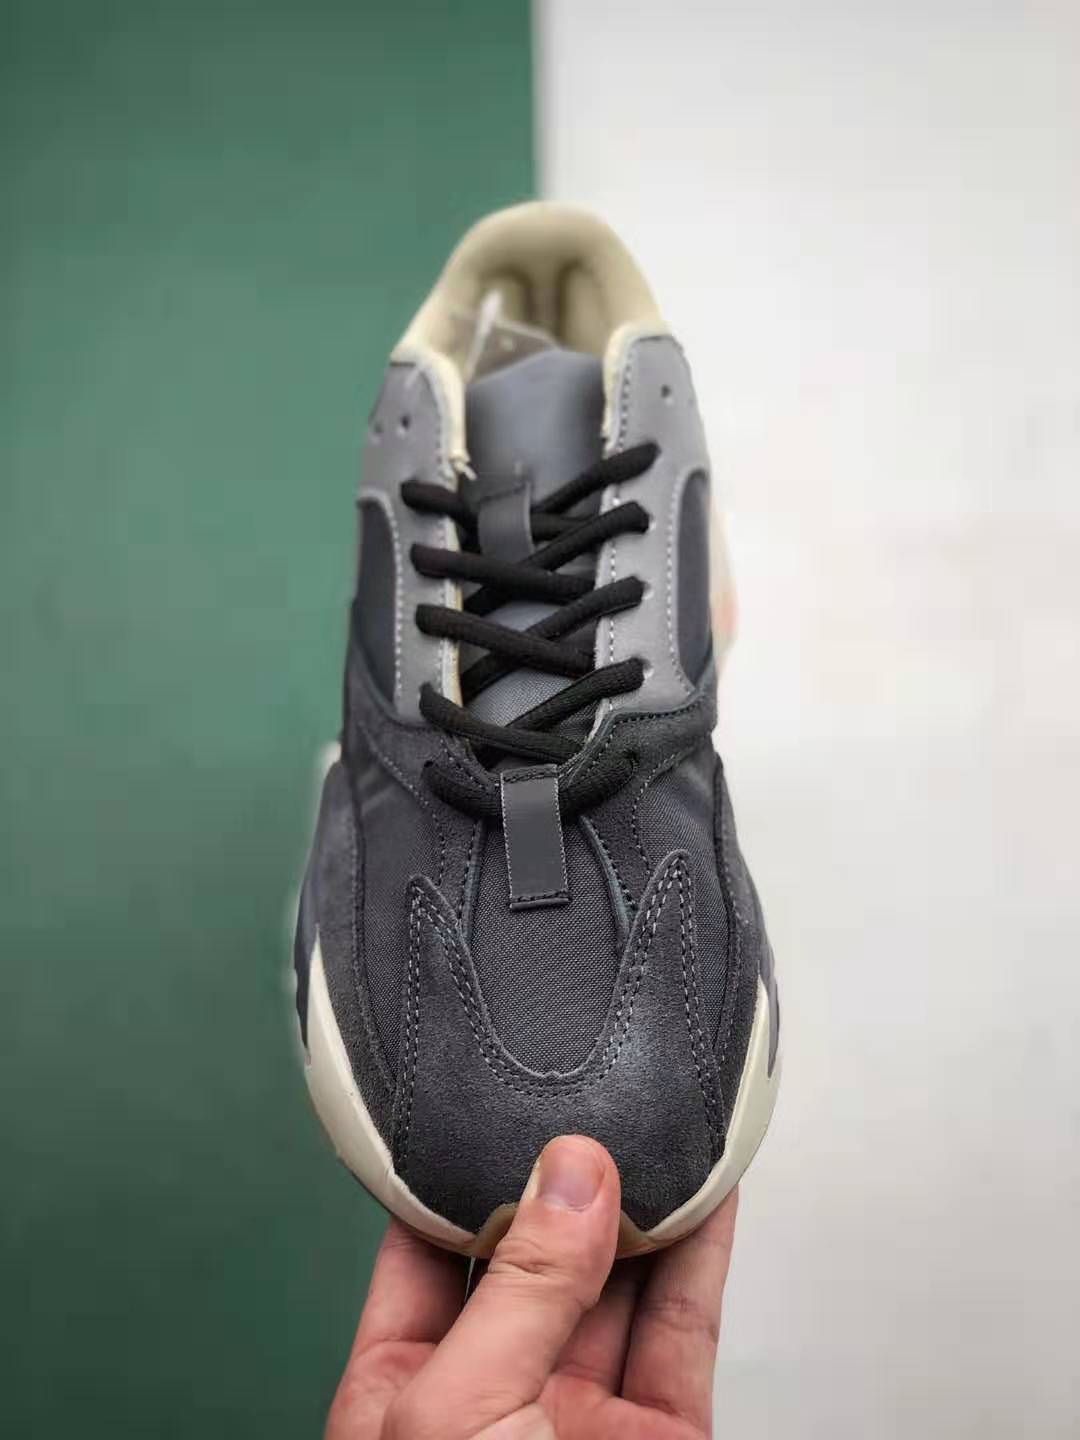 Adidas Yeezy Boost 700 'Magnet' FV9922 - Iconic Style and Unmatched Comfort